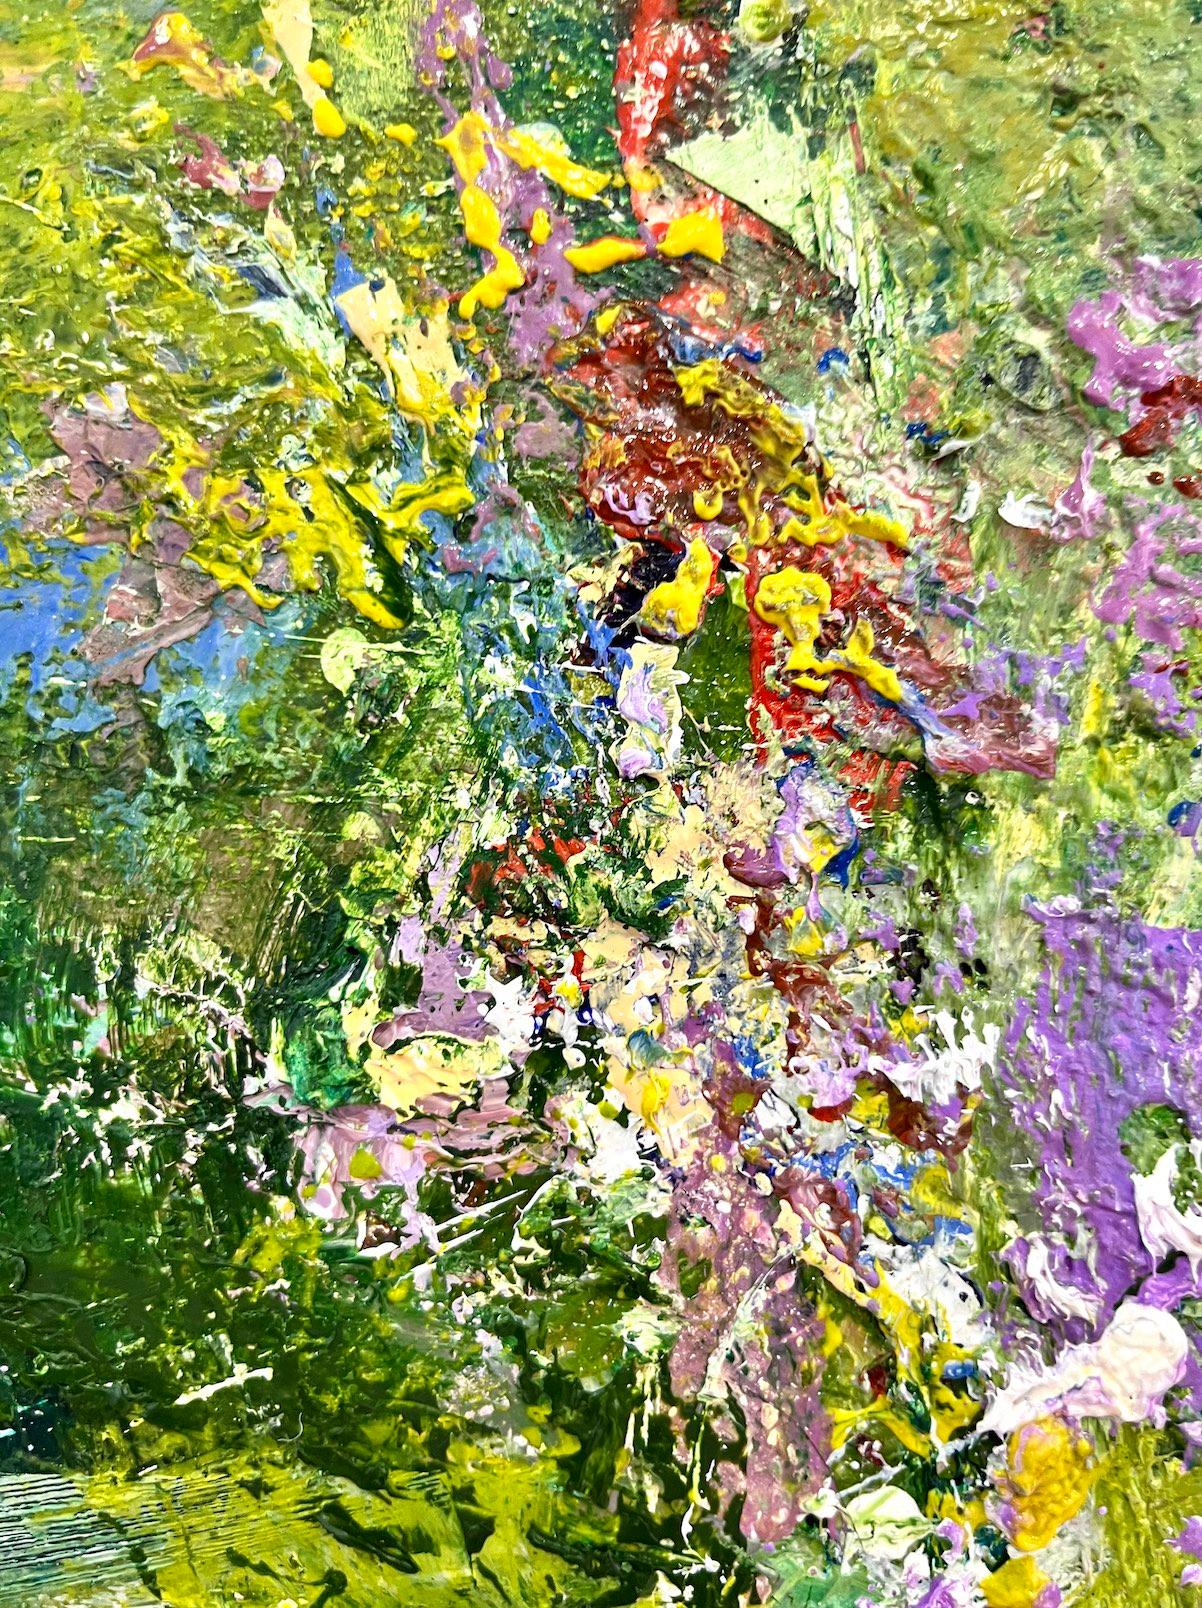 Wild Flowers, Holly And Ivy - Painting by Matthew Bourne 